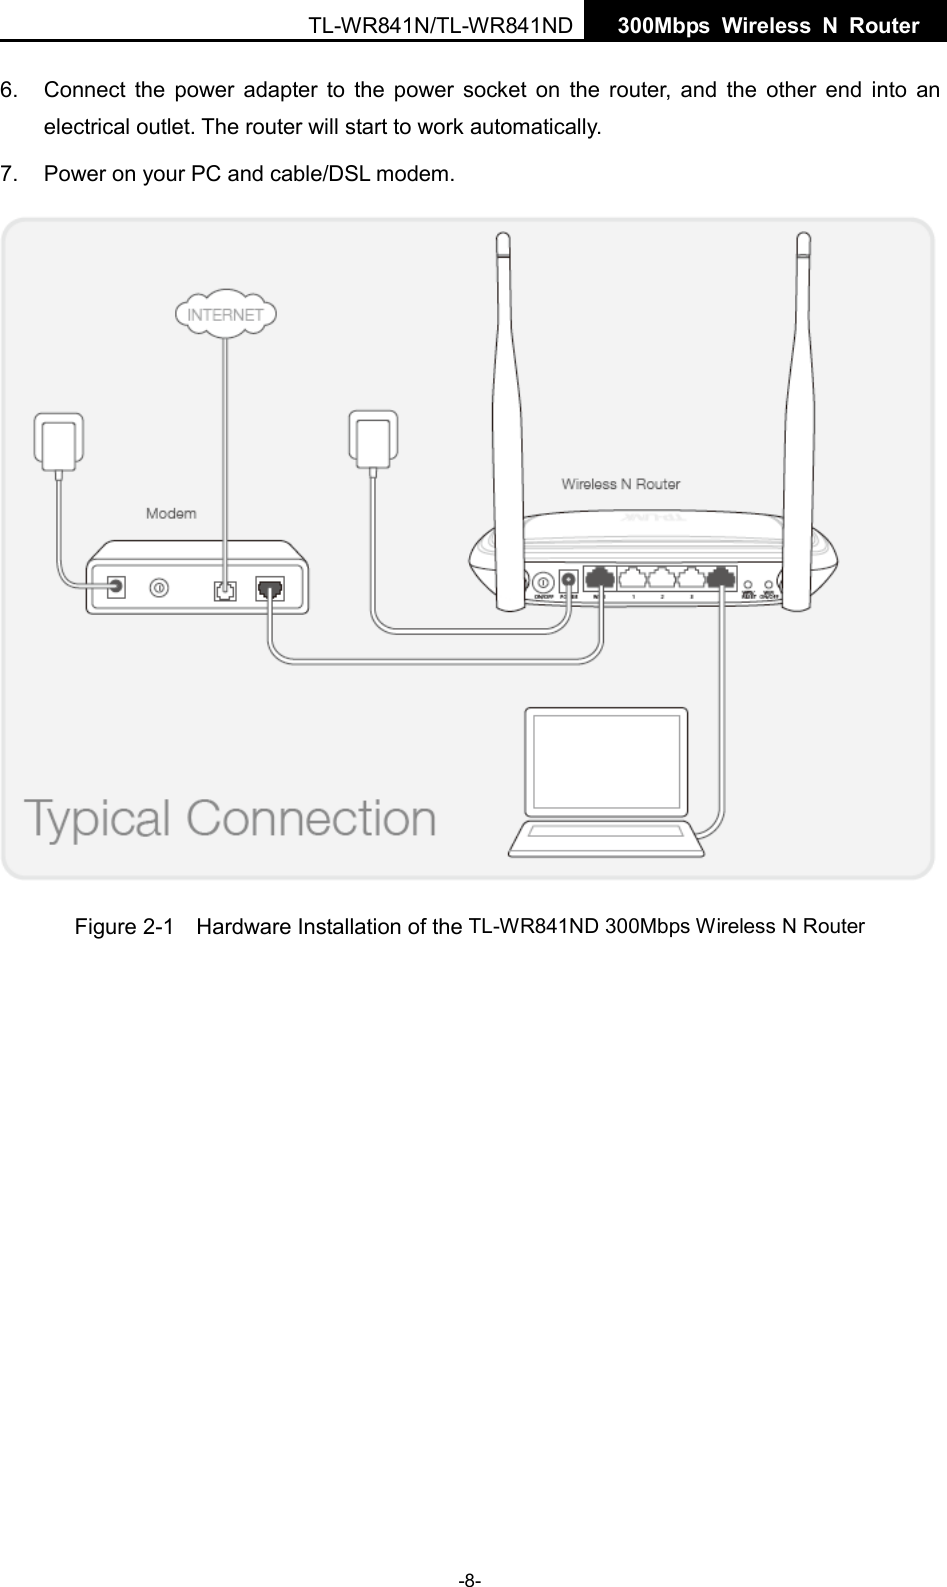  TL-WR841N/TL-WR841ND  300Mbps Wireless N  Router    6. Connect the power adapter to the power socket on the router, and the other end into an electrical outlet. The router will start to work automatically. 7. Power on your PC and cable/DSL modem.  Figure 2-1  Hardware Installation of the TL-WR841ND 300Mbps Wireless N Router -8- 